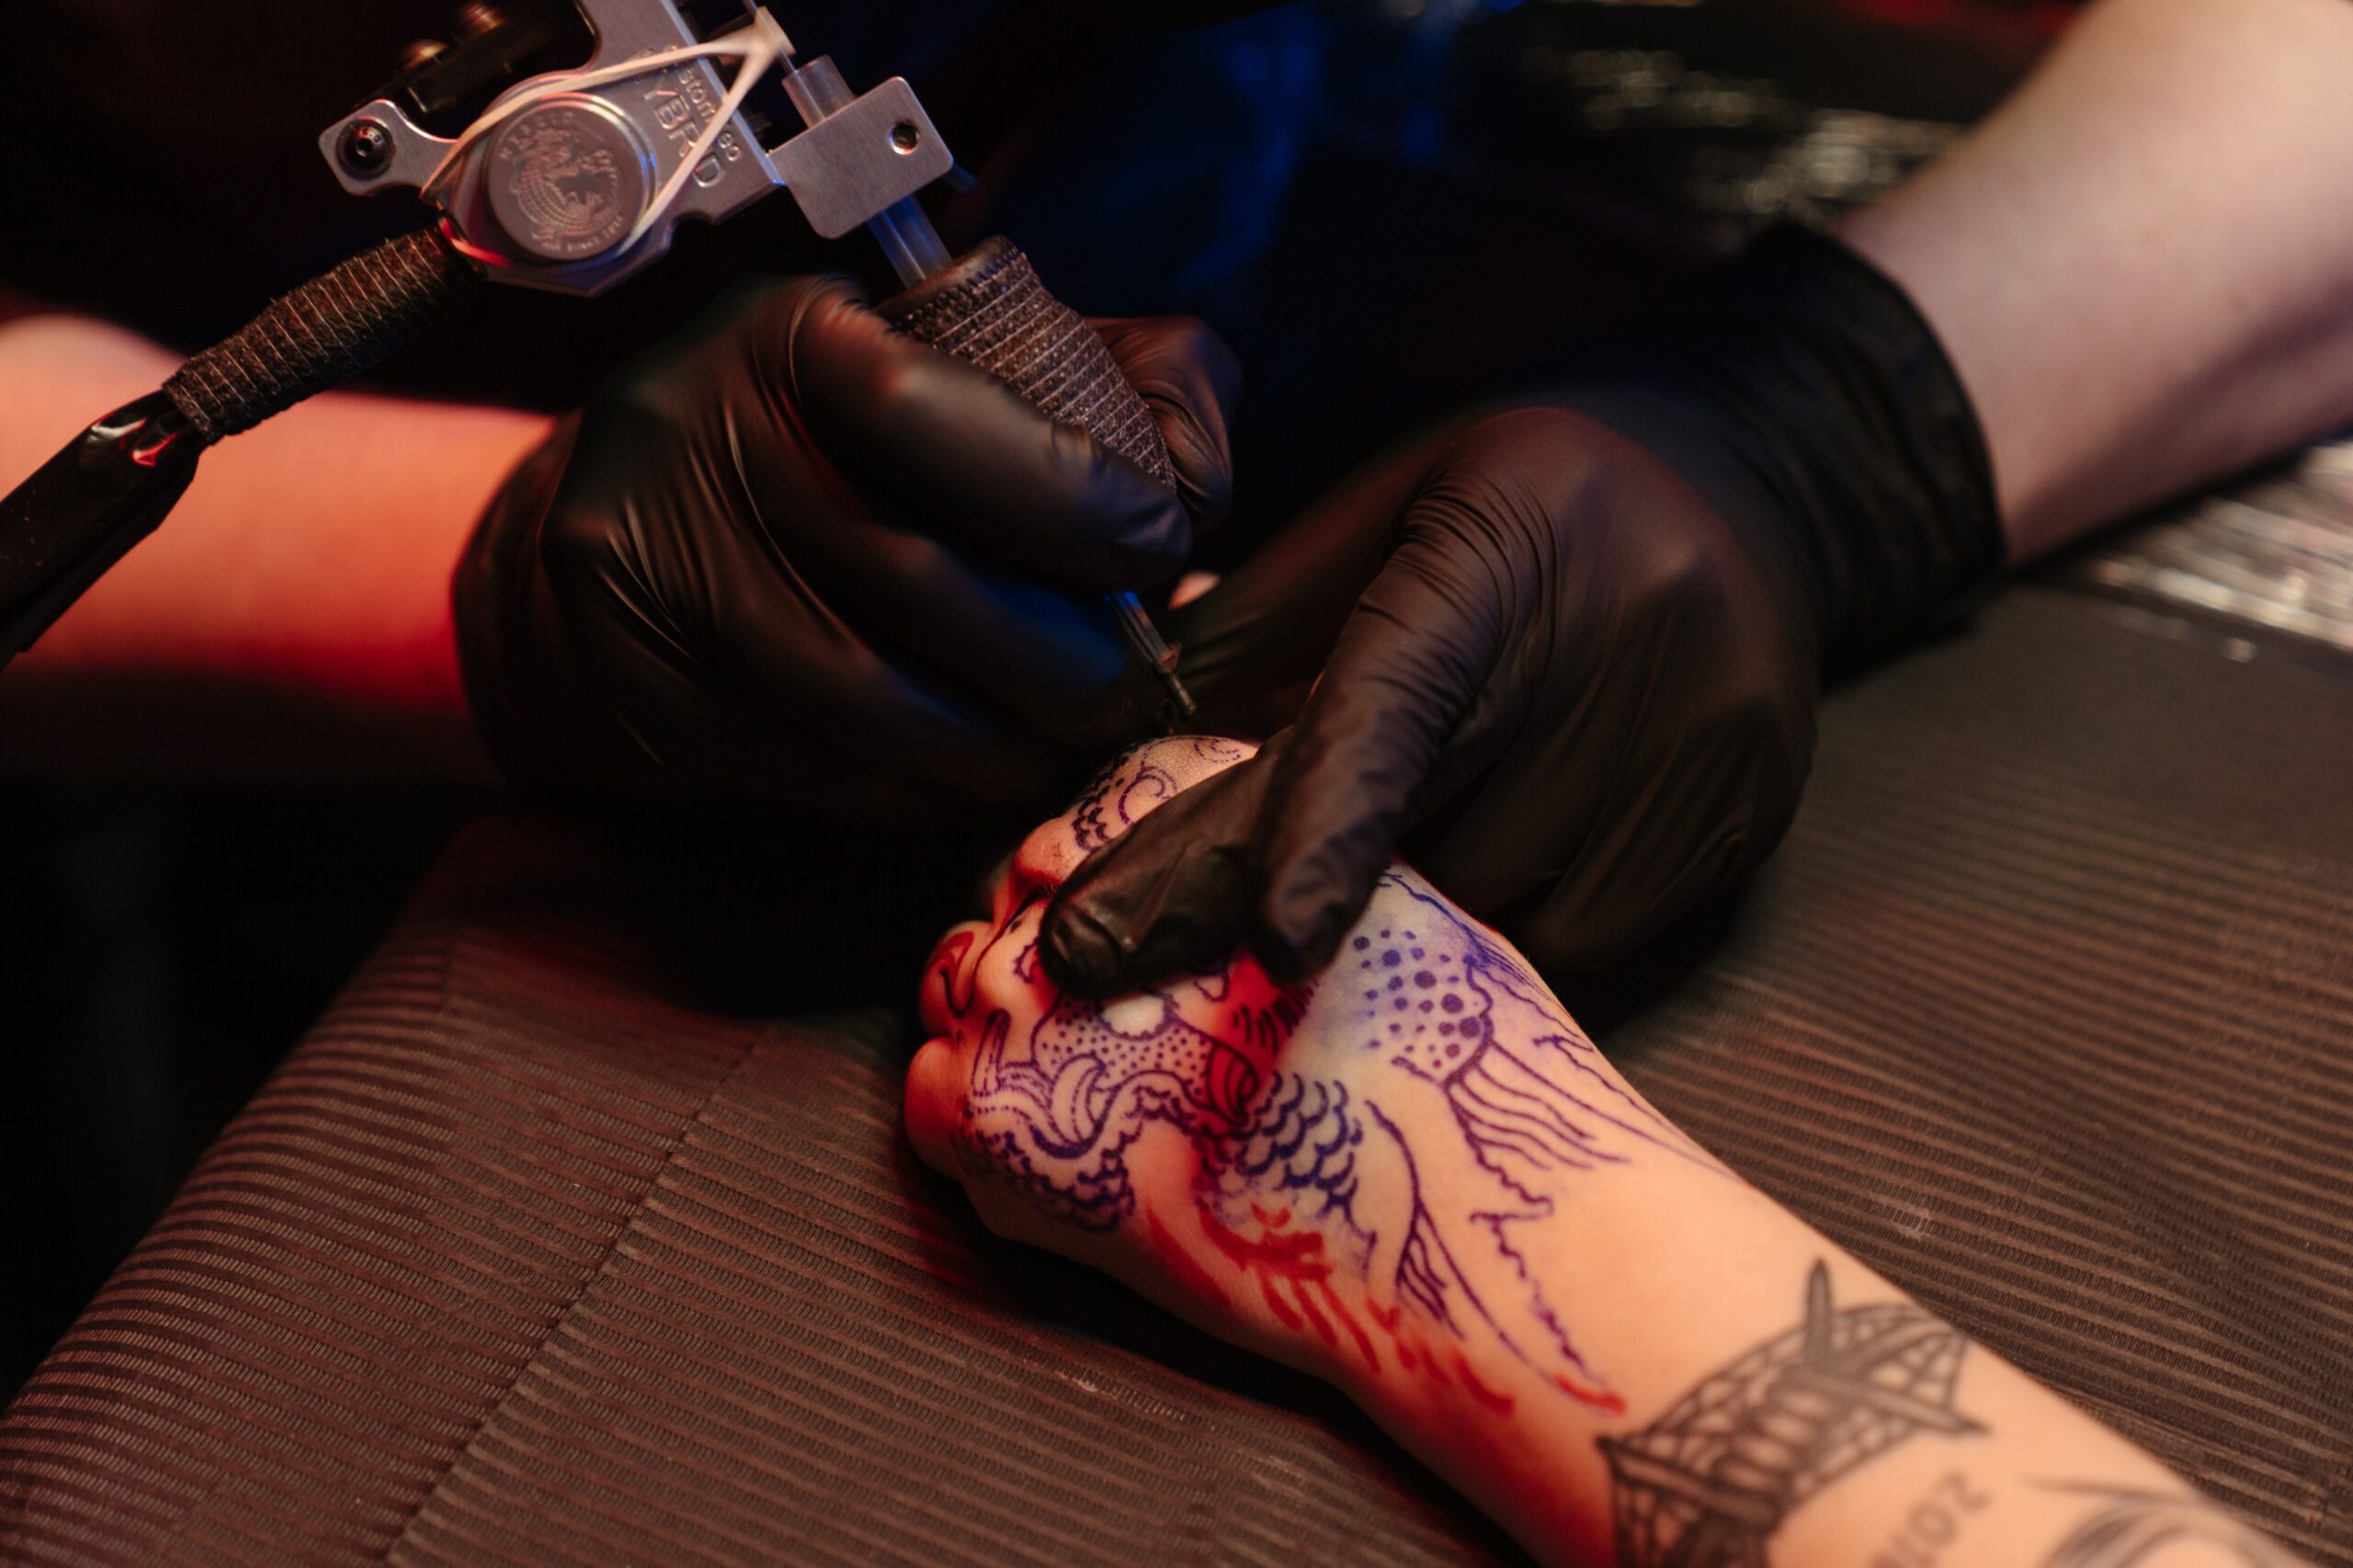 The Most Unique Name Tattoos to Express Your Personality